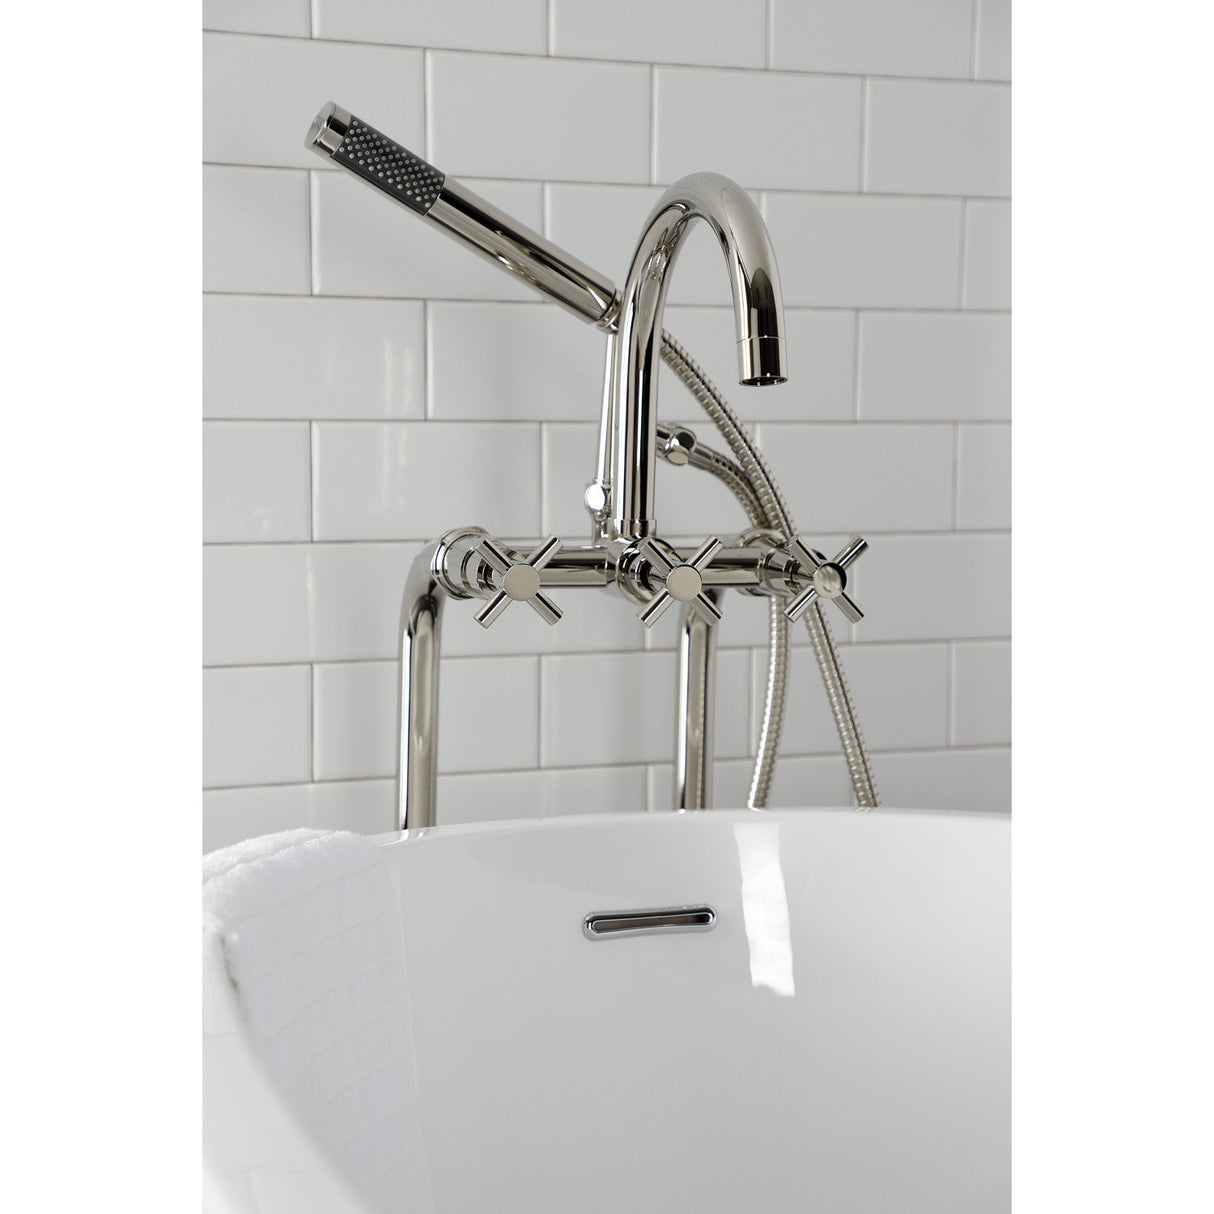 Concord CCK8106DX Freestanding Tub Faucet with Supply Line and Stop Valve, Polished Nickel